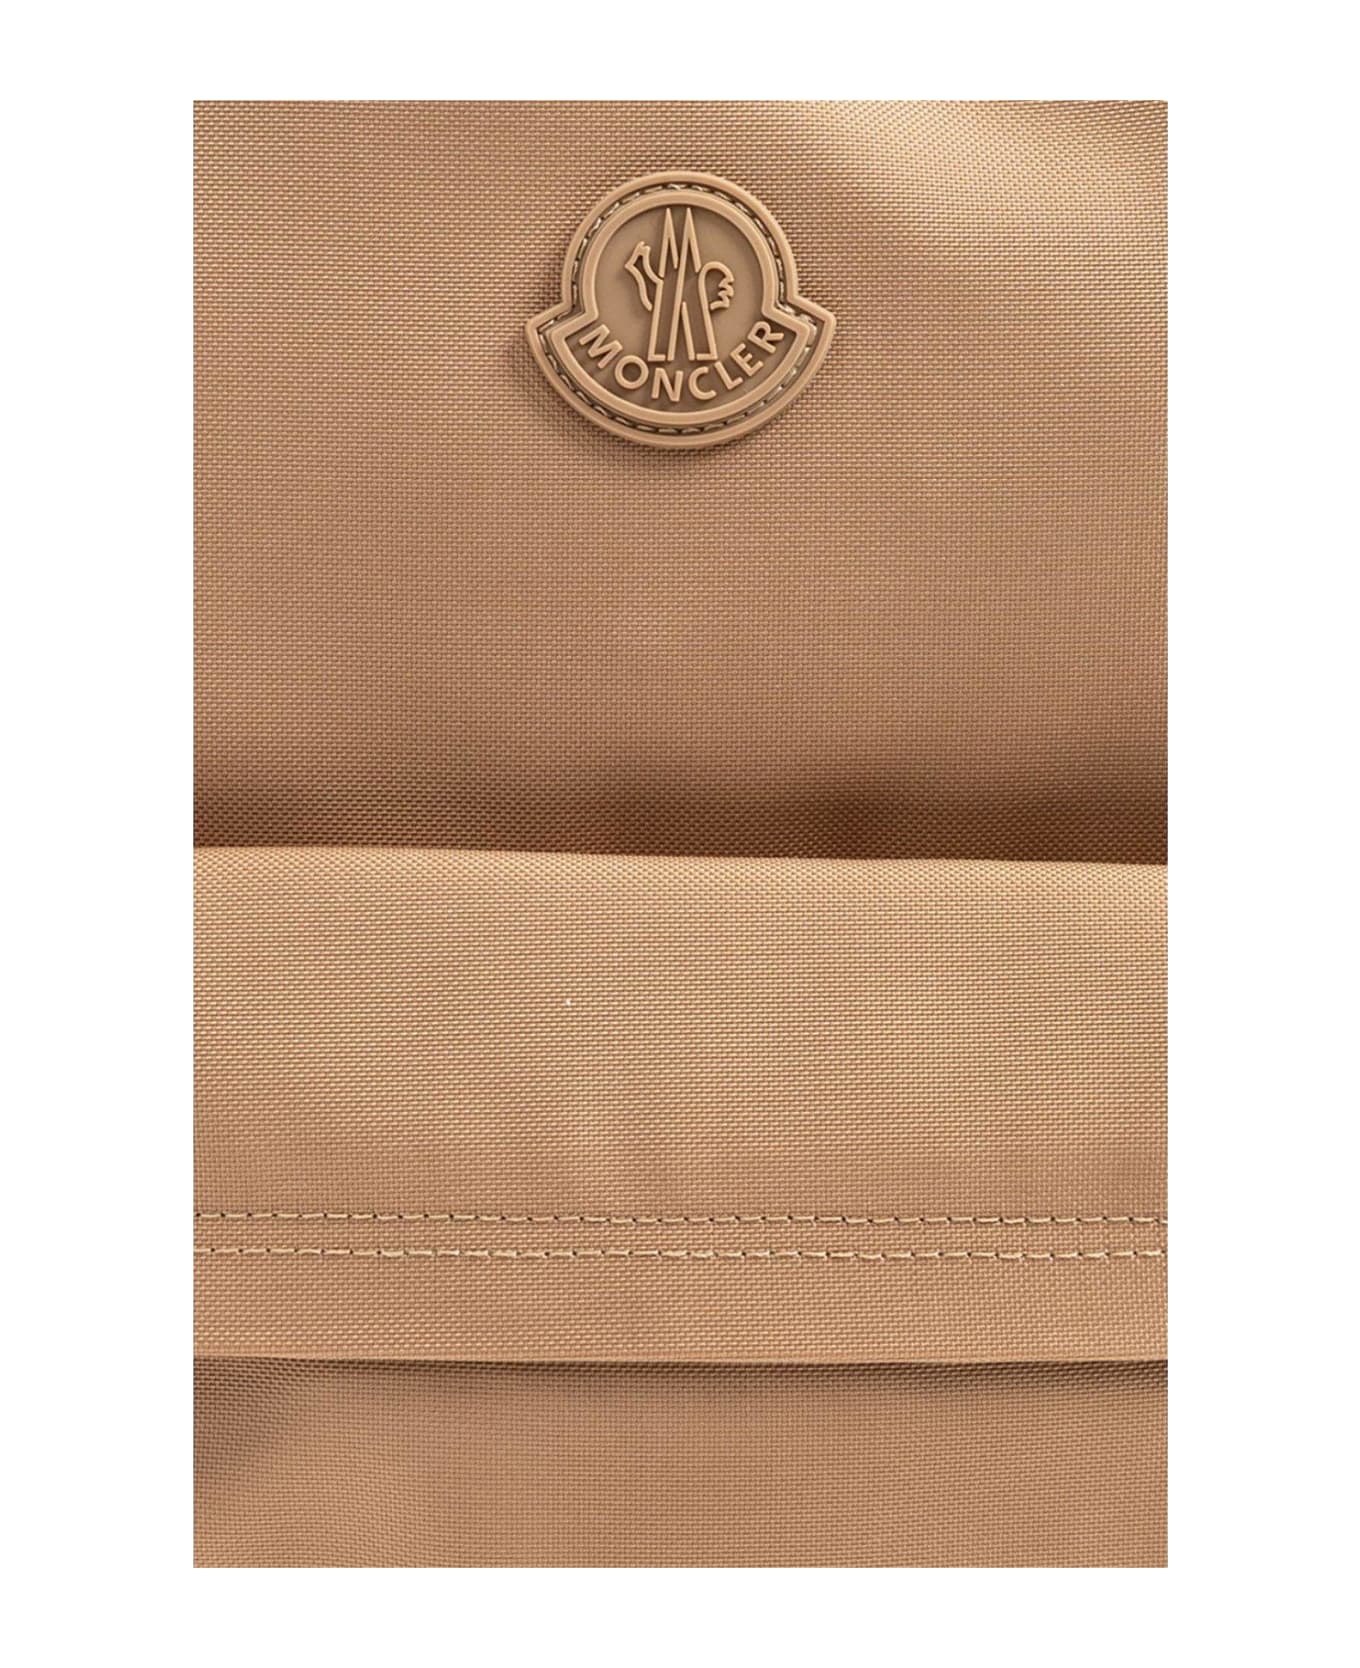 Moncler New Pierrick Logo Patch Zipped Backpack - Brown